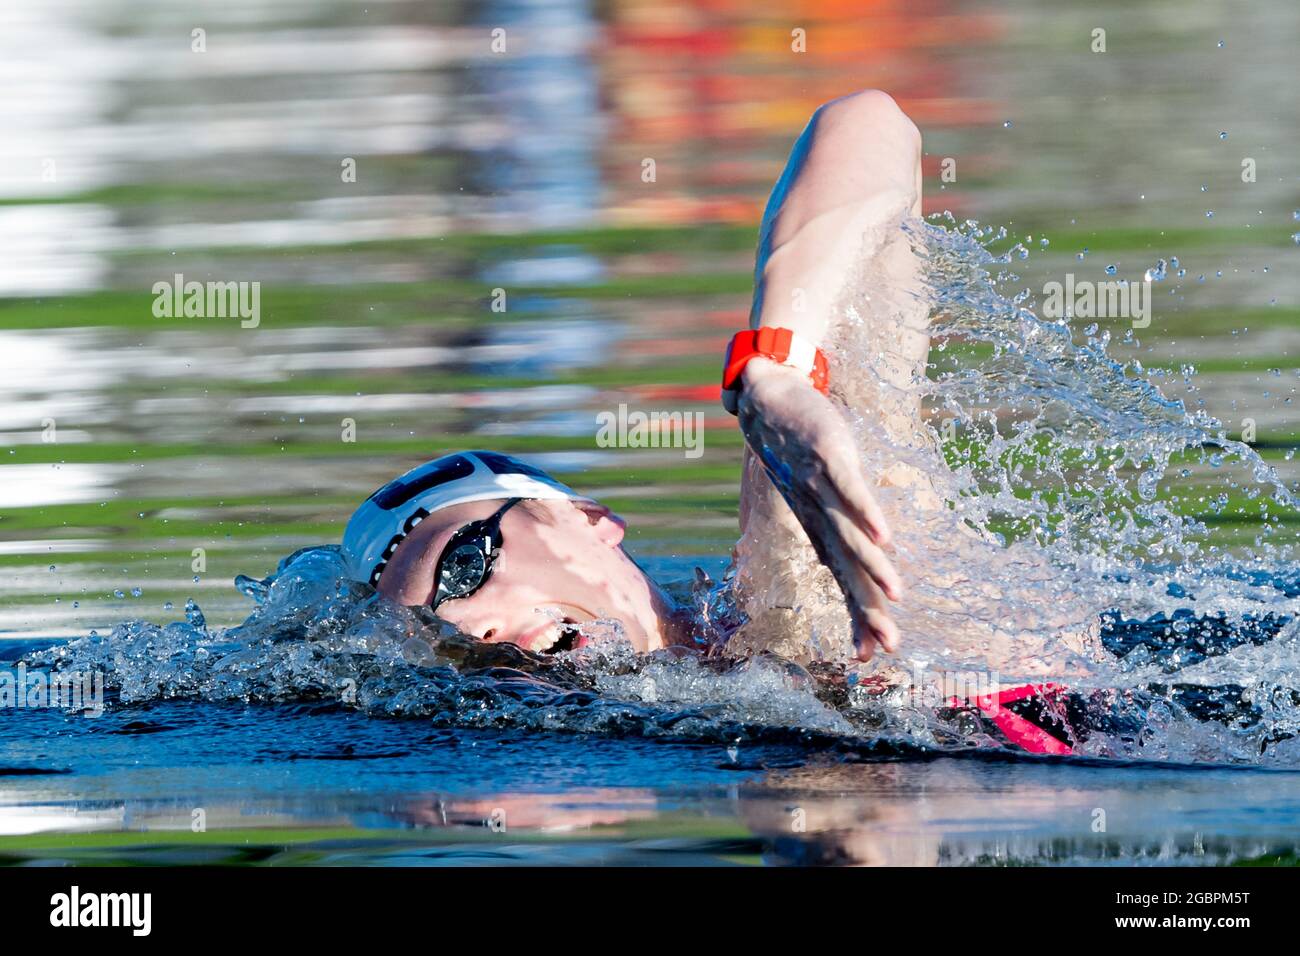 Tokyo, Japan. 05th Aug, 2021. Florian Wellbrock of Germany competes in the men 10km marathon swimming at Odaiba Marine Park during the Tokyo 2020 Olympic games in Tokyo, August 5th, 2021. Photo Giorgio Scala/Deepbluemedia/Insidefoto Credit: insidefoto srl/Alamy Live News Stock Photo